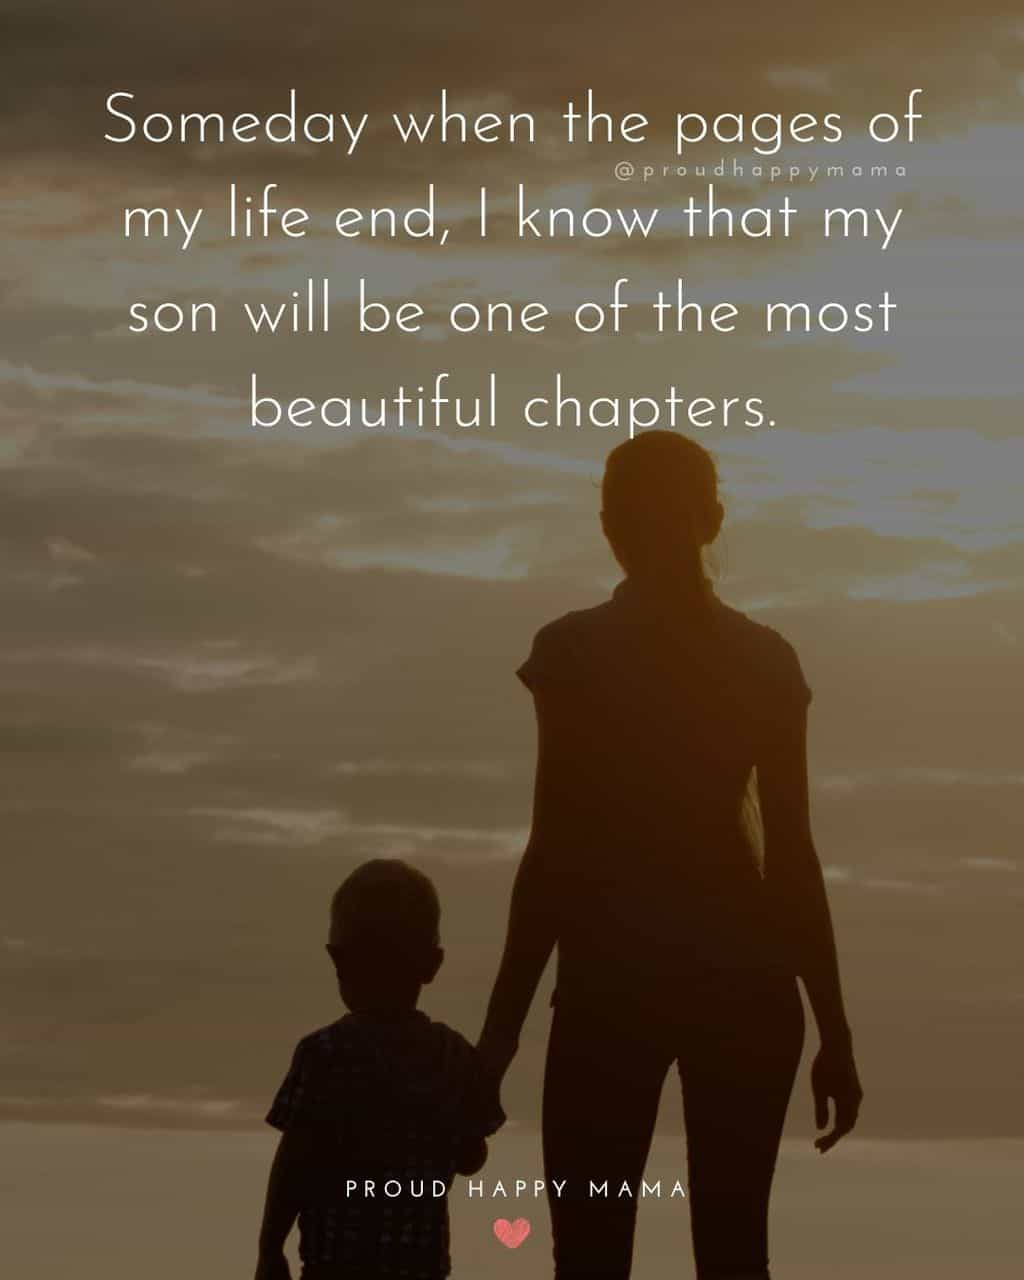 Son Quotes - Someday when the pages of my life end, I know that my son will be one of the most beautiful chapters.’Son Quotes - Someday when the pages of my life end, I know that my son will be one of the most beautiful chapters.’